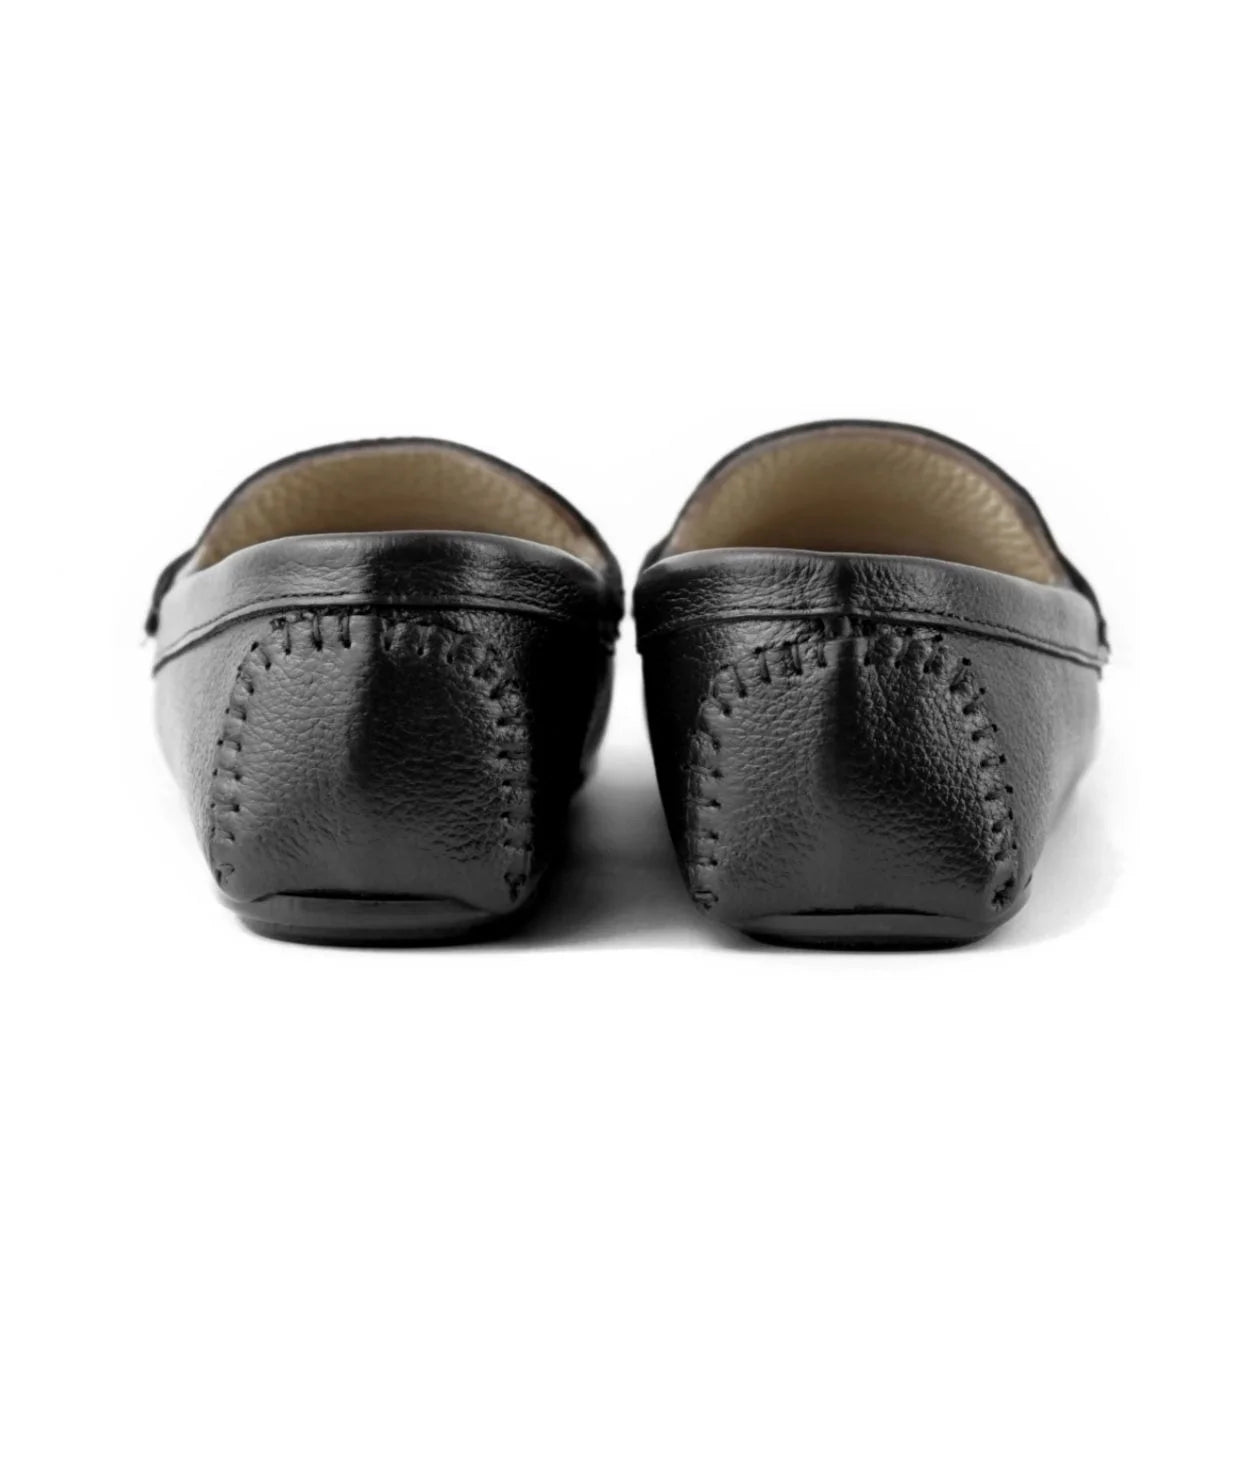 Black Leather Classic Loafer